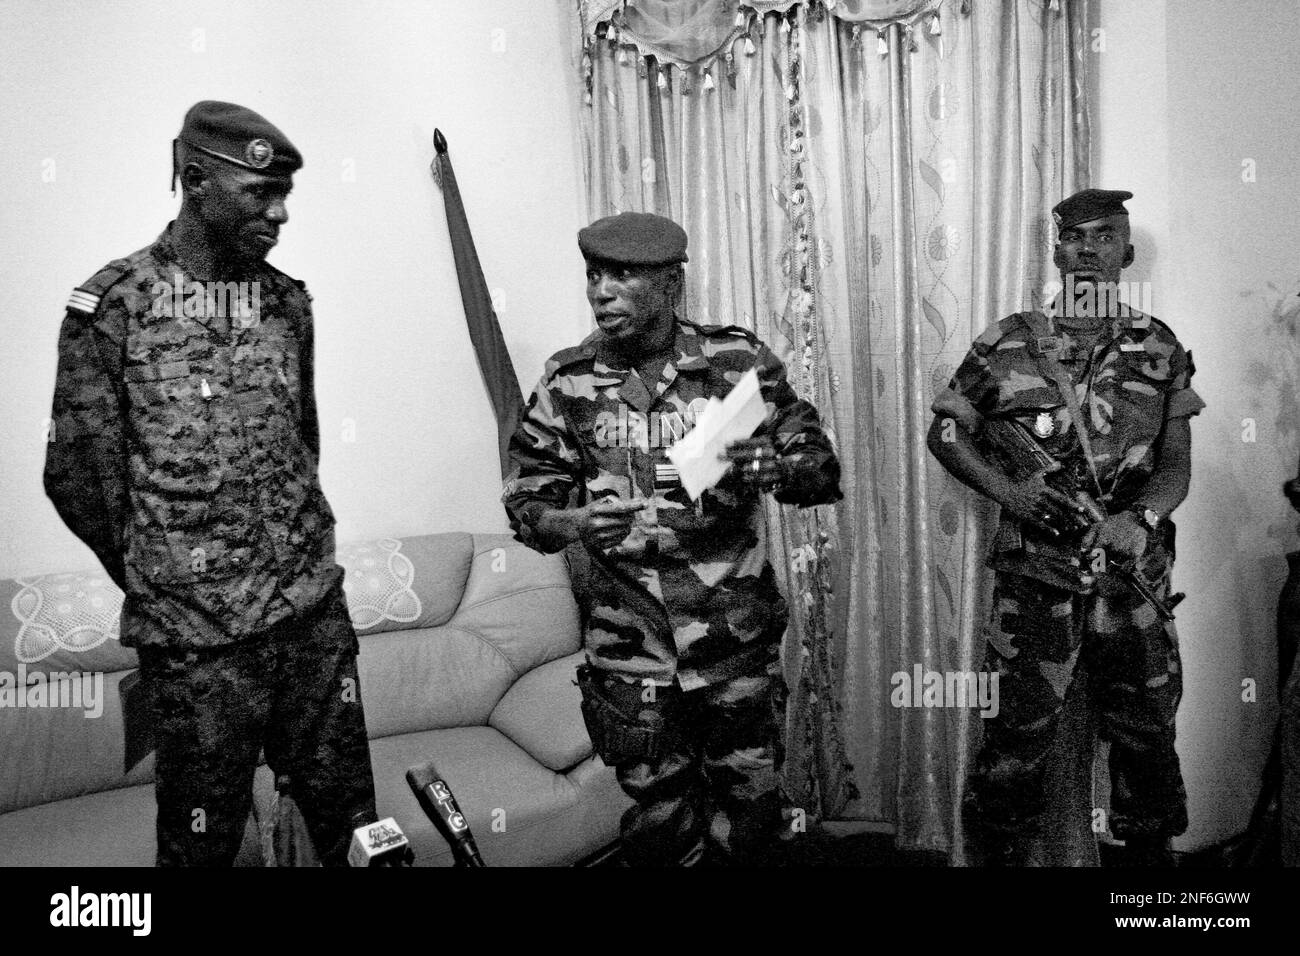 Guinea Conakry military junta leader Capt. Moussa "Dadis" Camara screams in  a waiting room adjacent to his bedroom at a military camp in Conakry Monday  March 9, 2009. It's 9 p.m., and